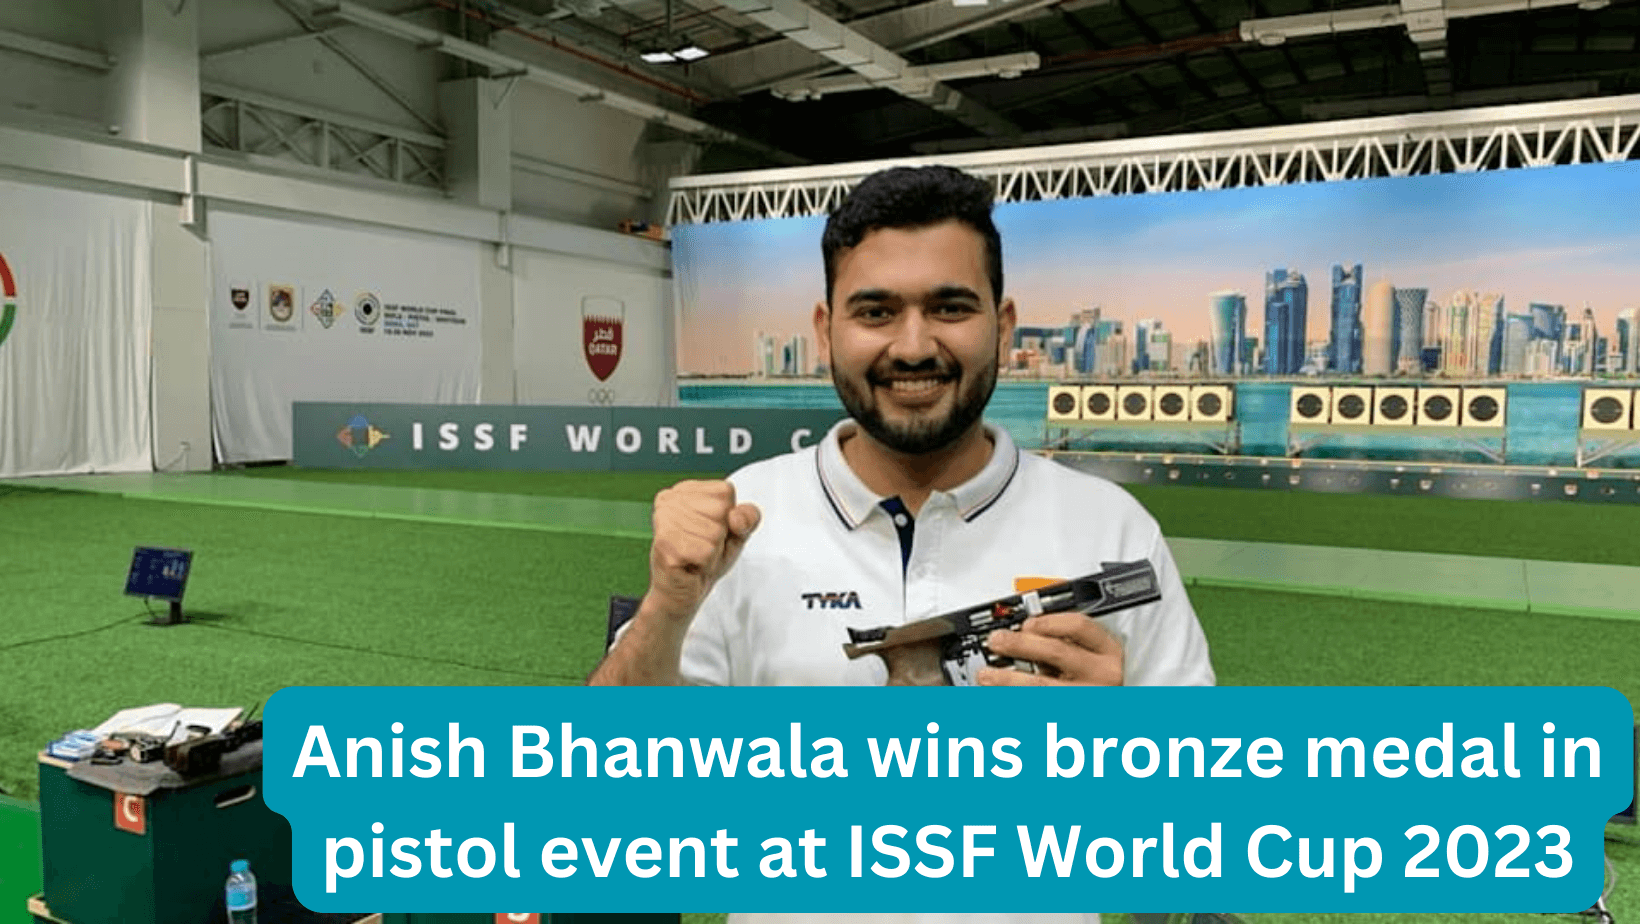 Anish Bhanwala wins bronze medal in pistol event at ISSF World Cup 2023